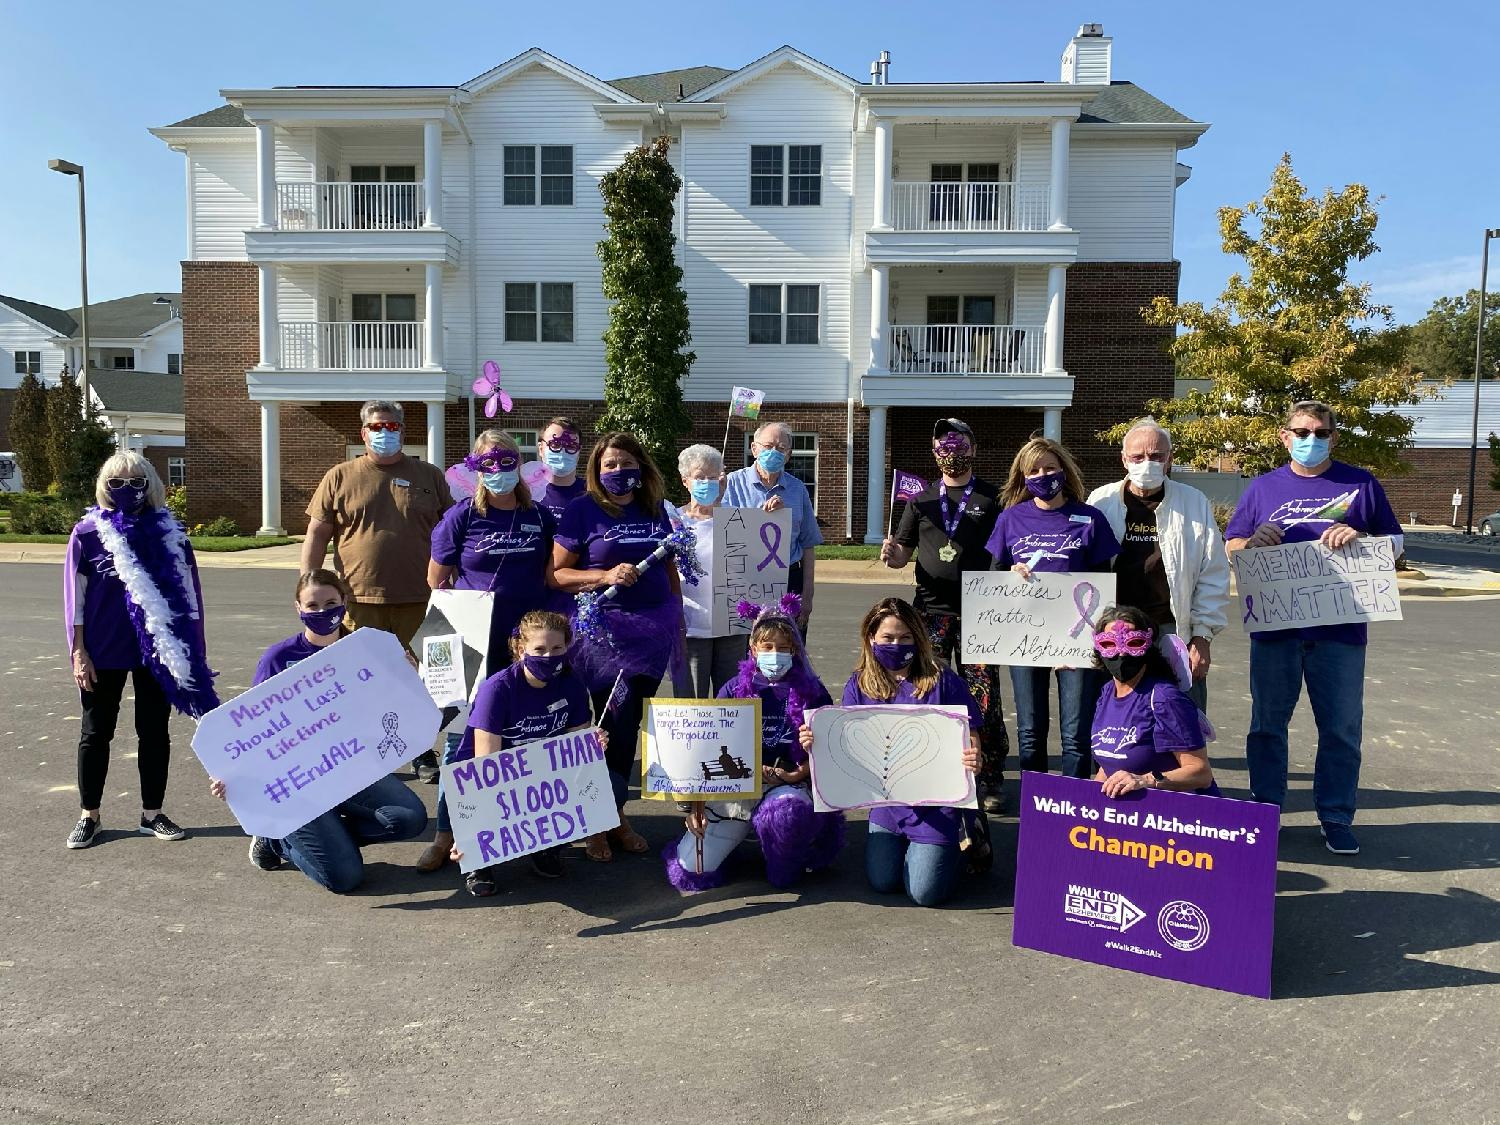 Staff dressing up and having fun at our 2020 Walk to End Alzheimer's Event!